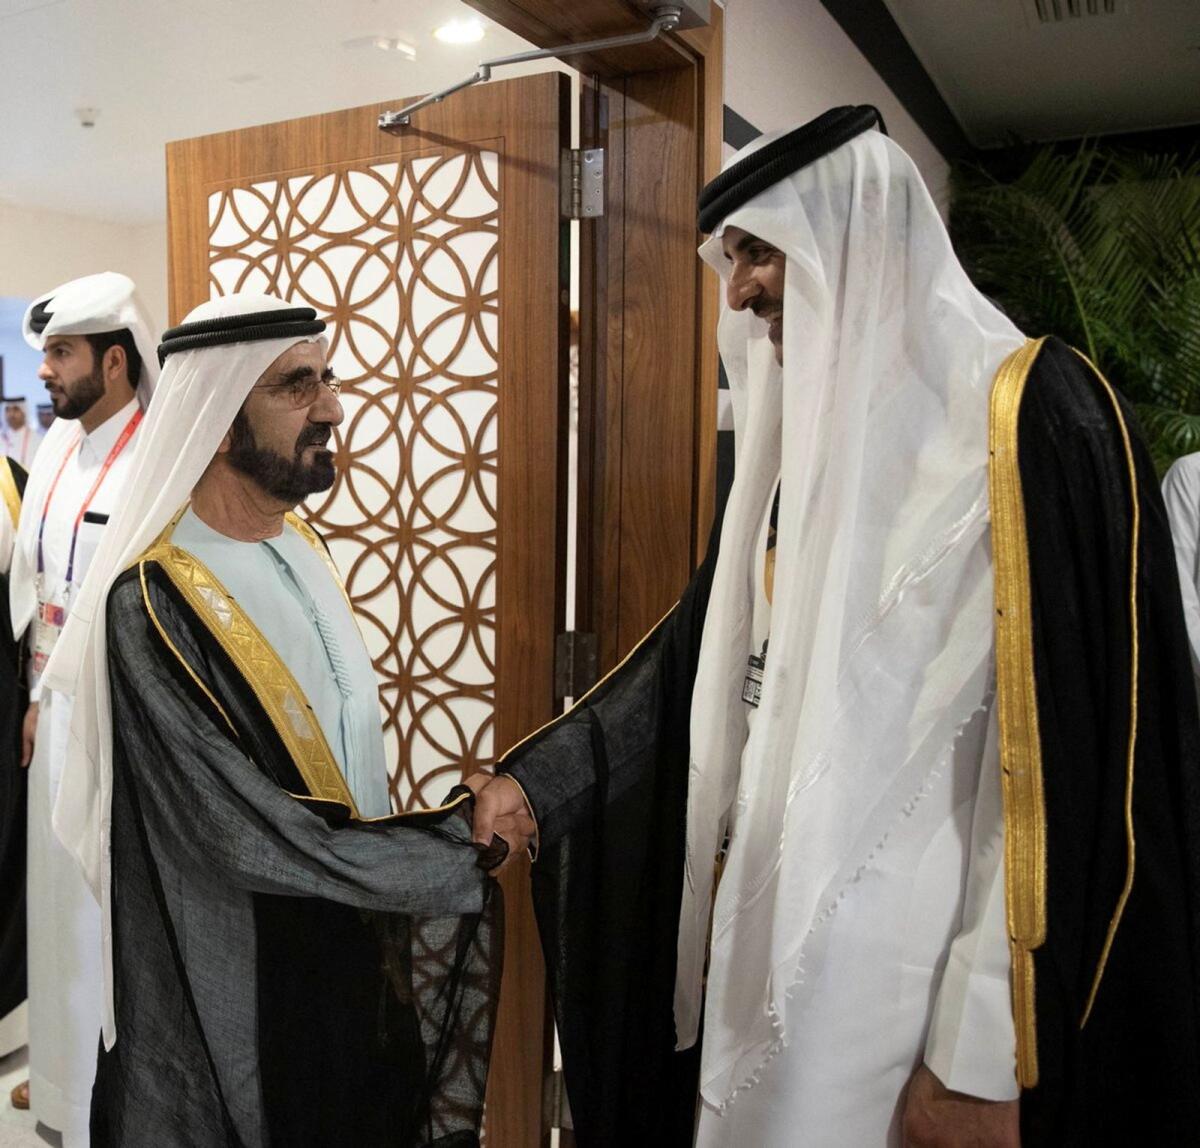 His Highness Sheikh Mohammed bin Rashid Al Maktoum, the Vice-President and Prime Minister of the UAE and Ruler of Dubai, shakes hands with Qatari Emir Sheikh Tamim bin Hamad al-Thani on the sidelines of the World Cup. Photo: Qatar News Agency